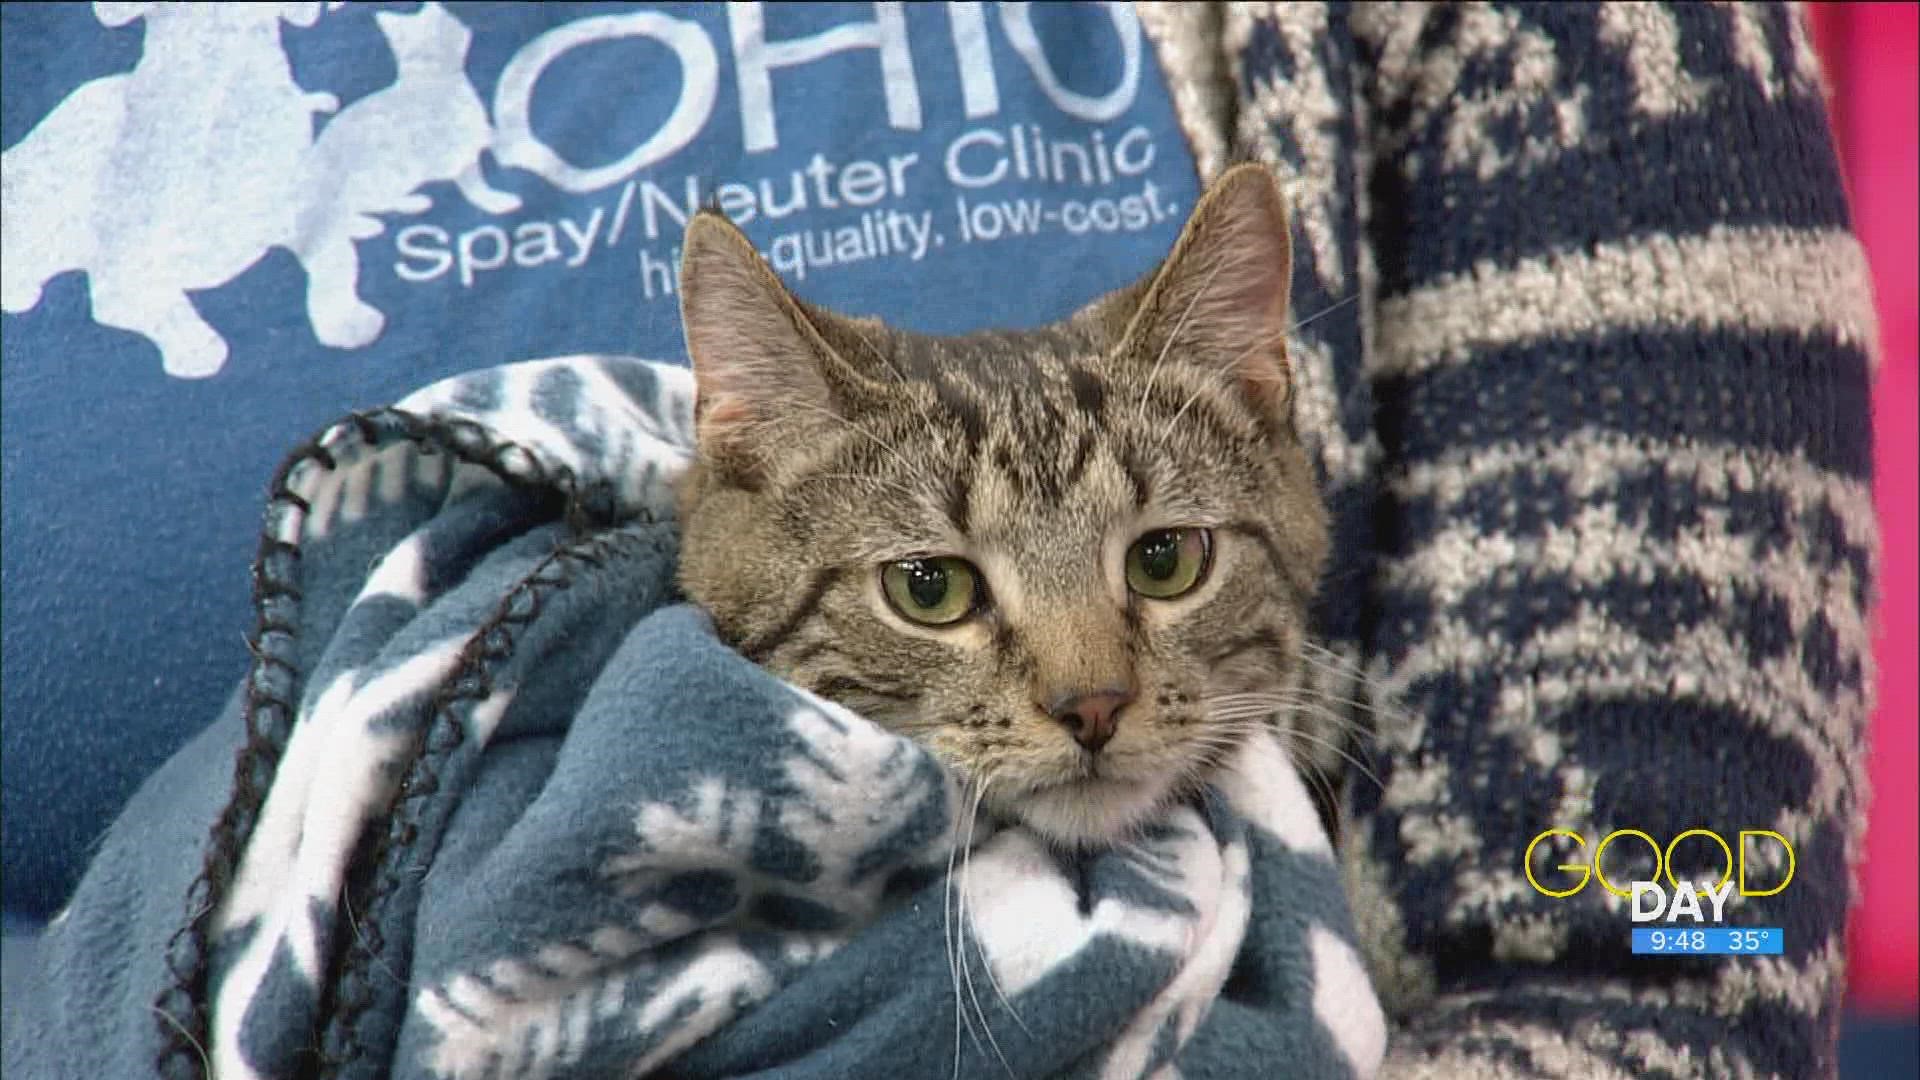 Laura Simmons Wark from Humane Ohio brings in Hobbs, a spokeskitten who needs a forever home.